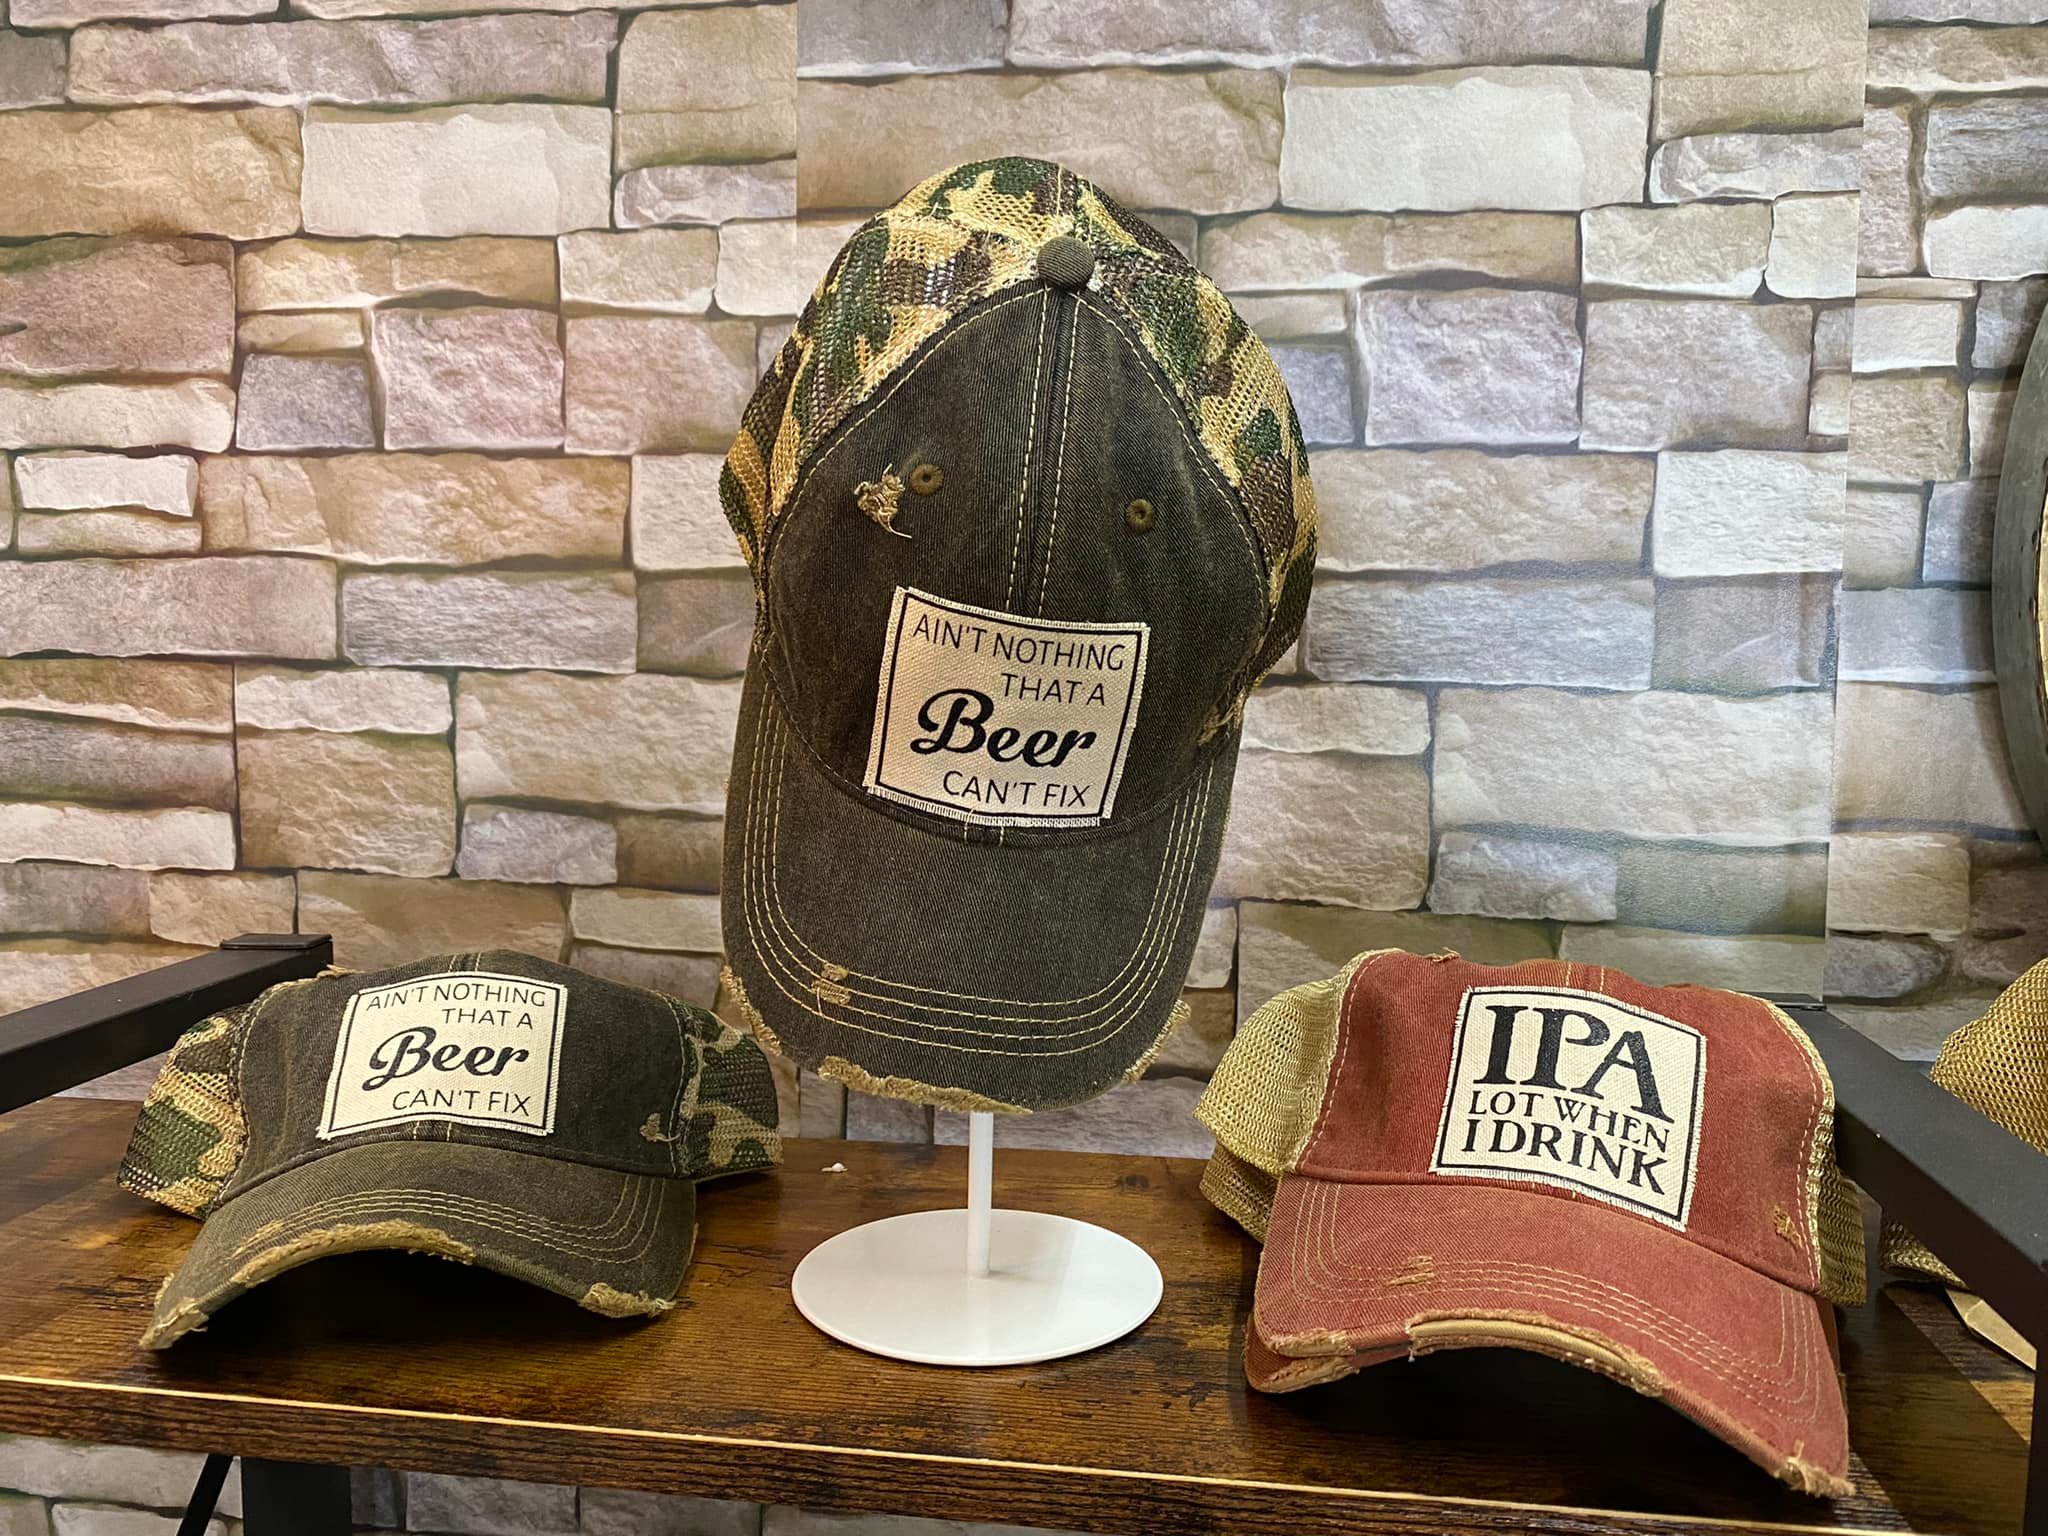 3 baseball caps that have beer sayings on them